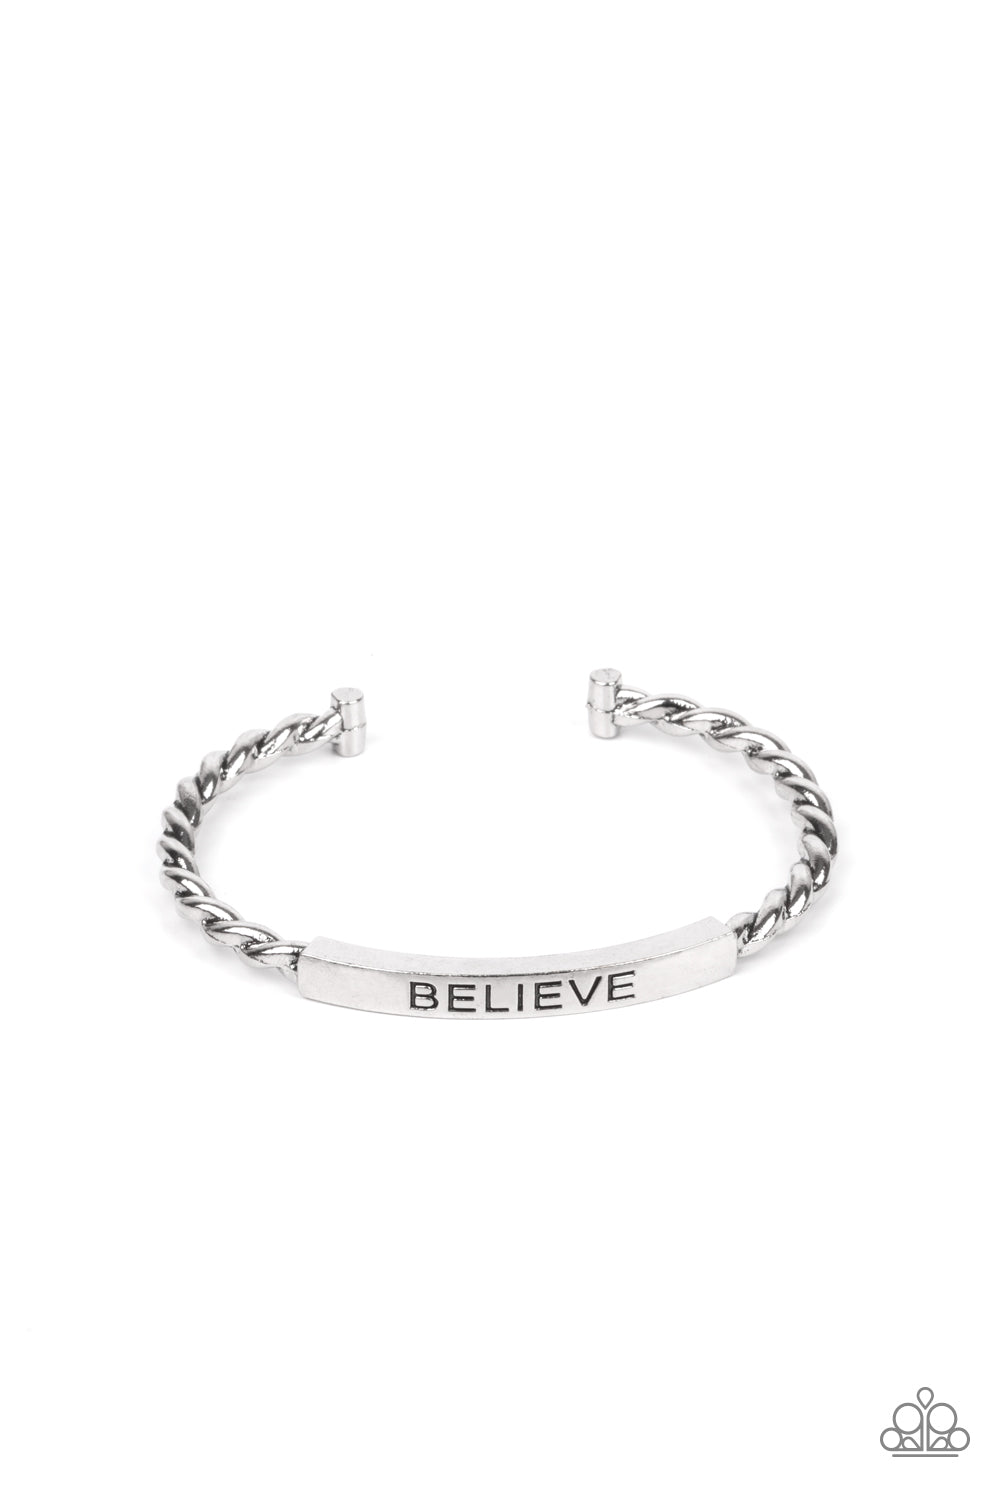 Keep Calm and Believe - Silver - Jewelz of Joy Boutique